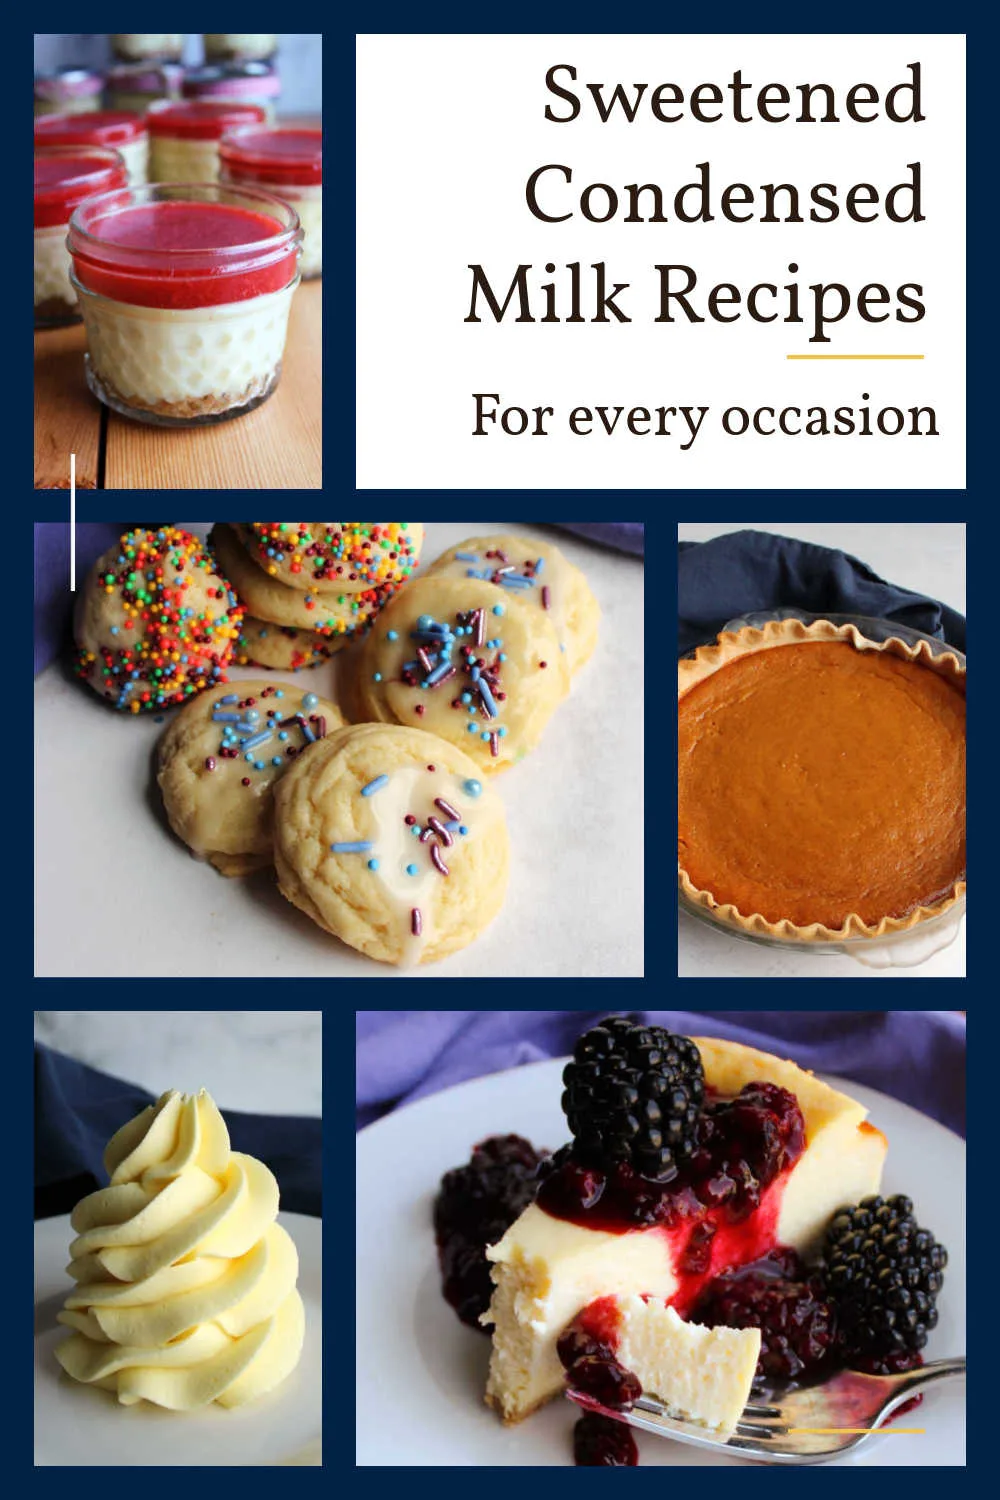 Having a can or two of condensed milk in the pantry means you are always a good recipe away from a great dessert. This collection of sweetened condensed milk recipes all contain some of that rich sweet goodness that makes for an extra special treat. No matter the occasion, there is sure to be an option that will satisfy your sweet tooth.